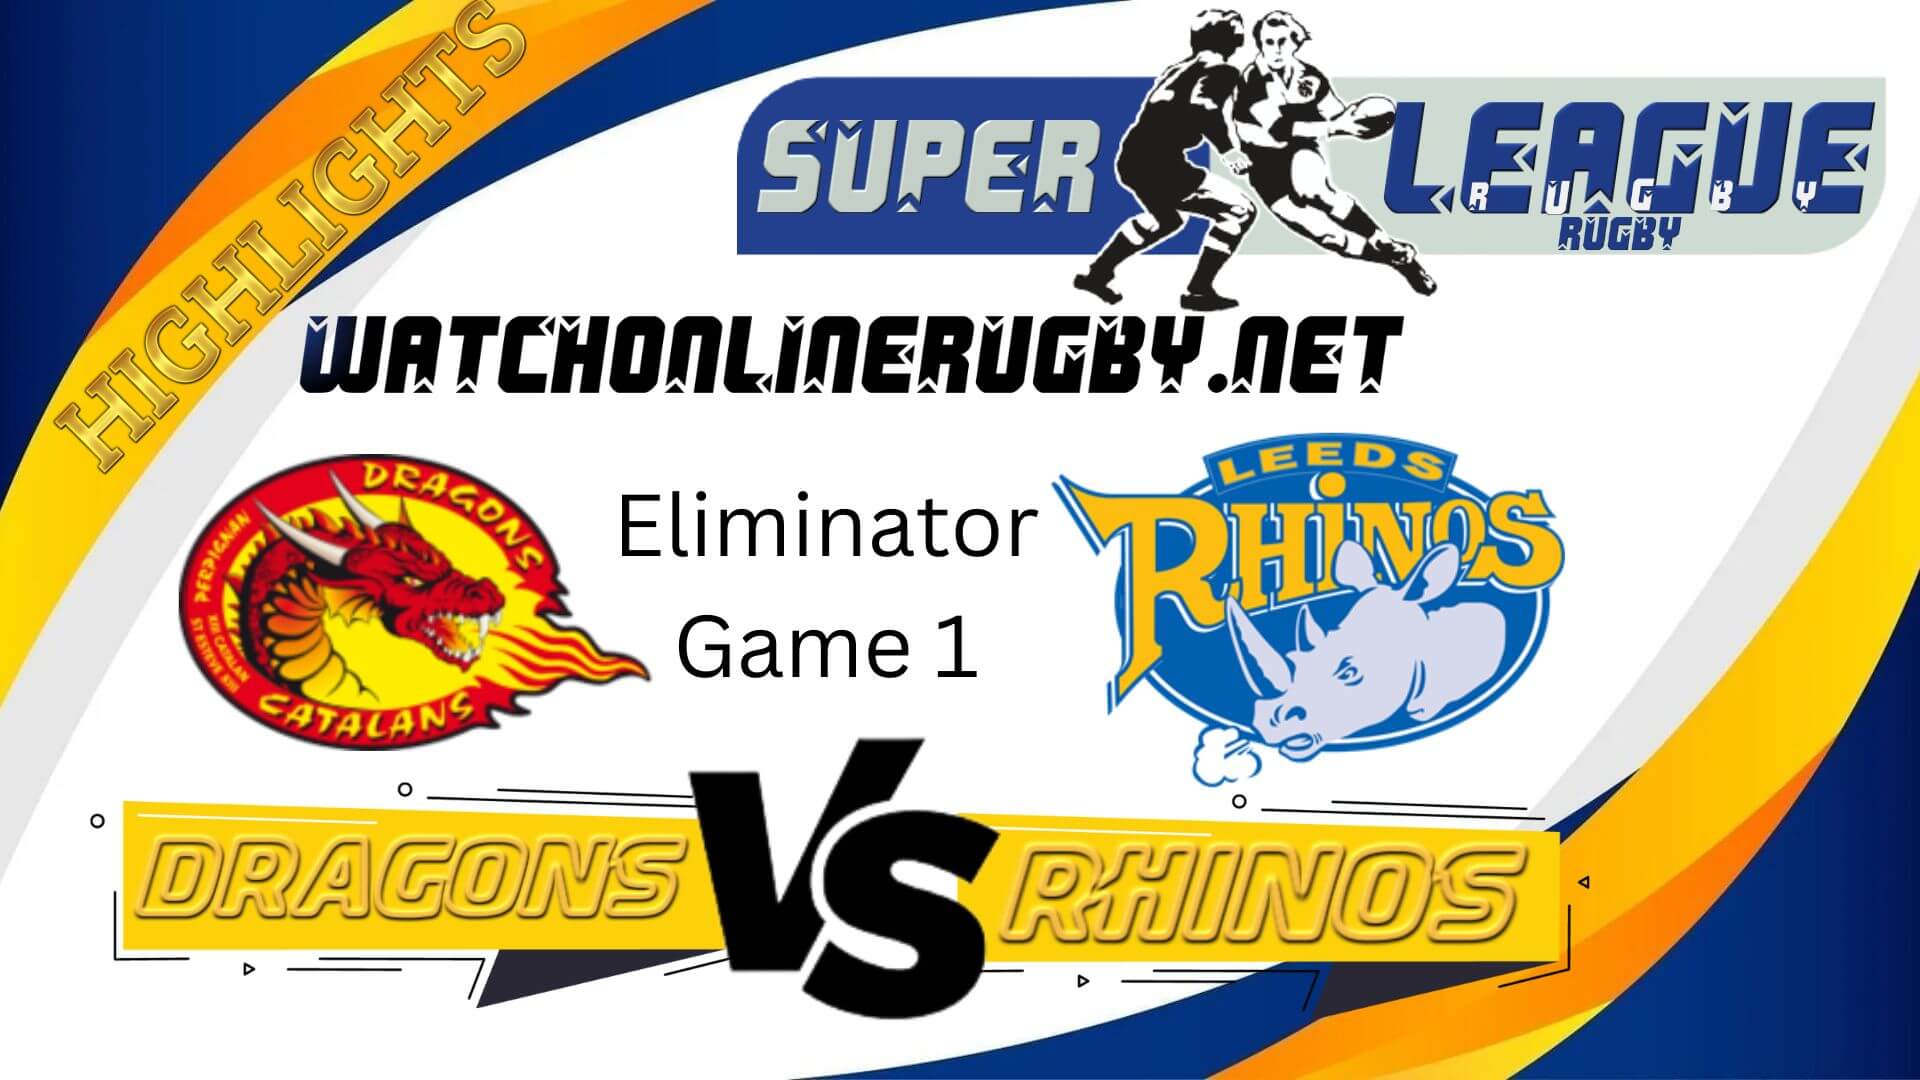 Catalans Dragons Vs Leeds Rhinos Super League Rugby 2022 Eliminator Game 1